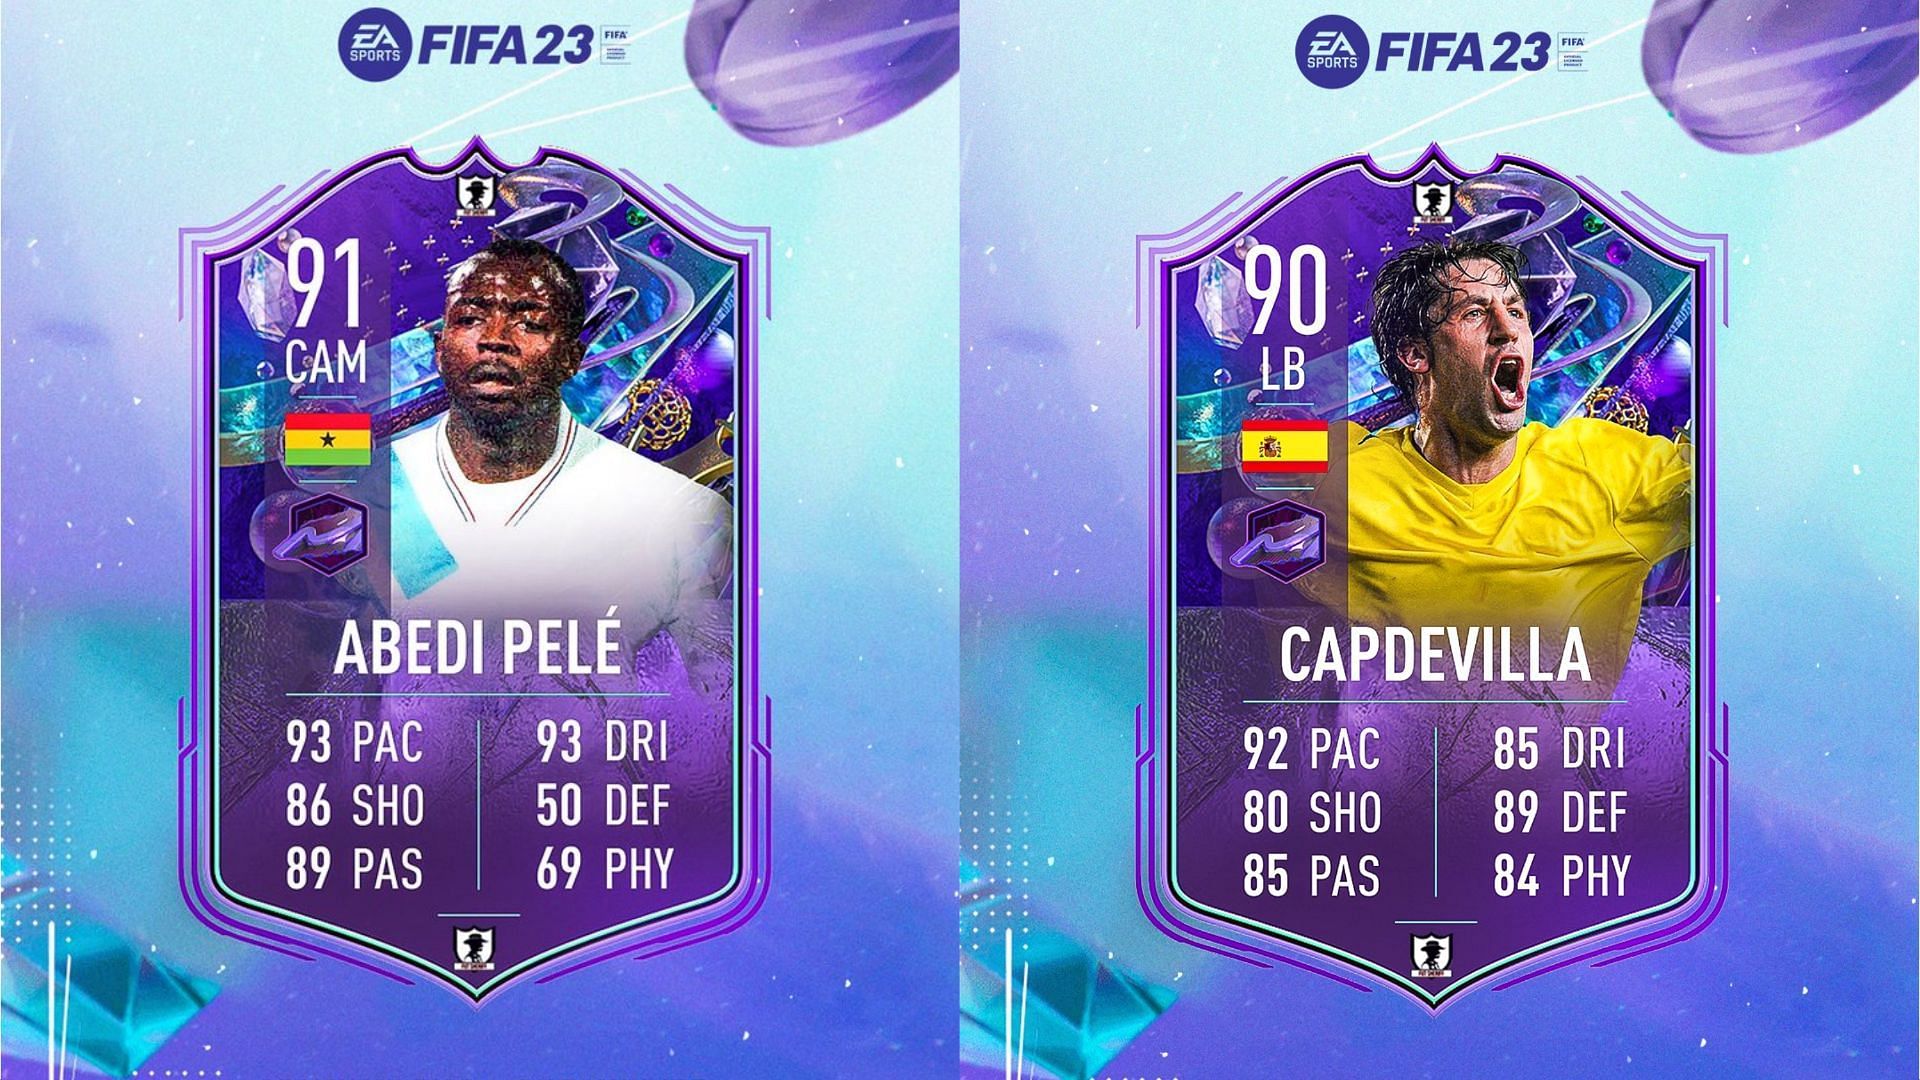 Capdevilla and Pele&rsquo;s Fantasy FUT Heroes cards could have very high demand in FIFA 23 (Images via Twitter/FUT Sheriff)